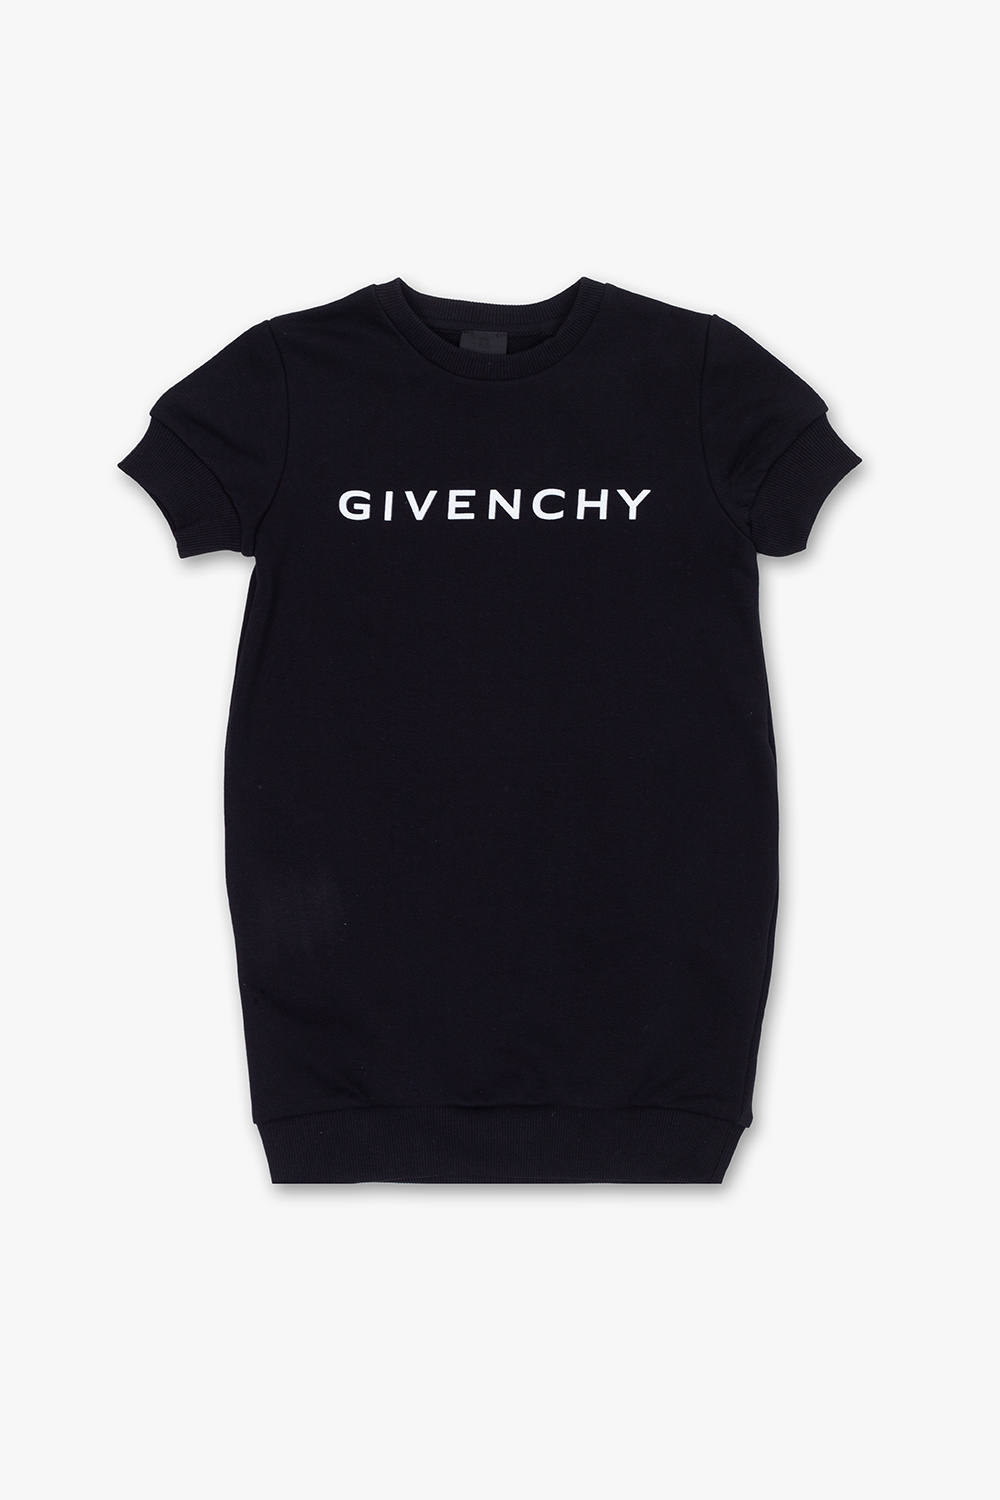 Givenchy Kids Dress with logo, Kids's Girls clothes (4-14 years)